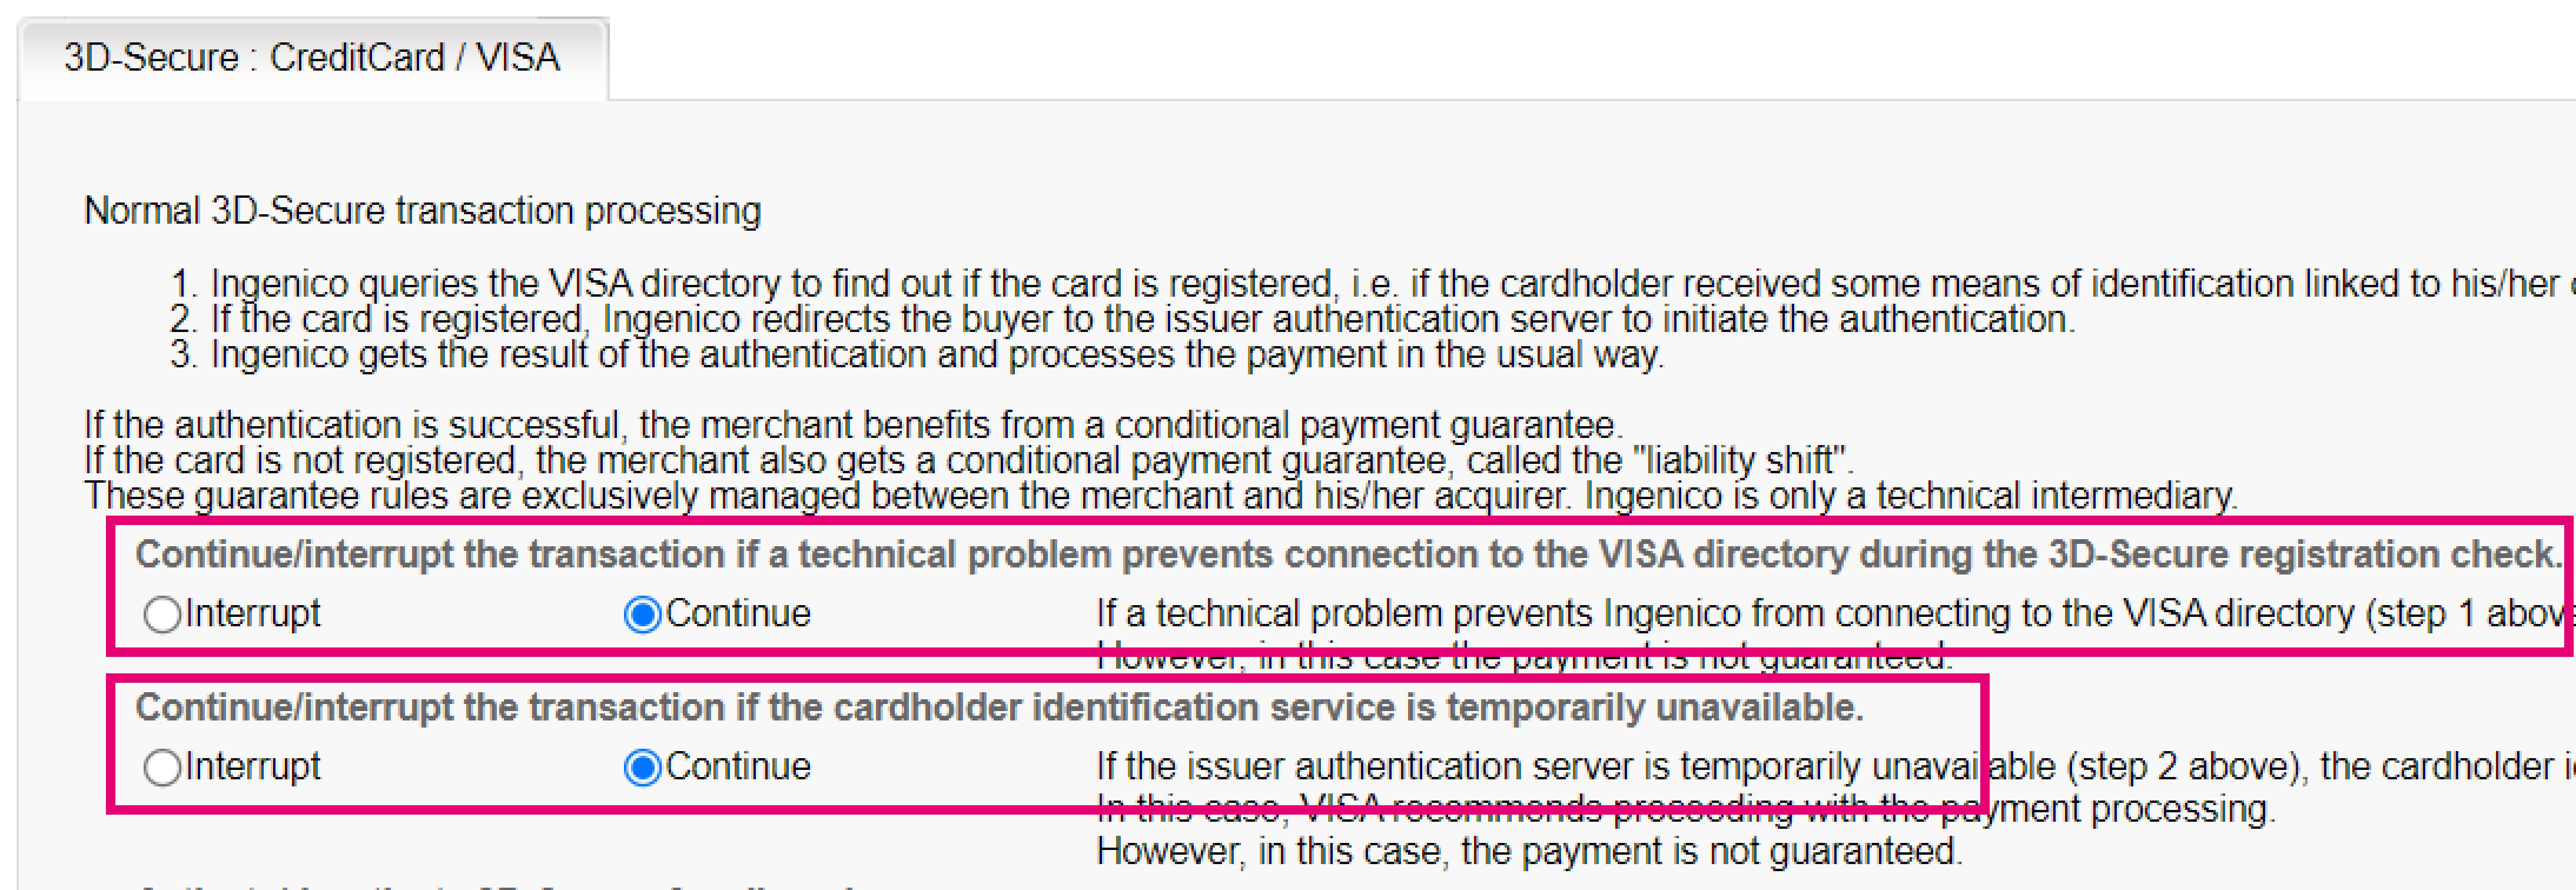 What is a liability shift for enrolled card